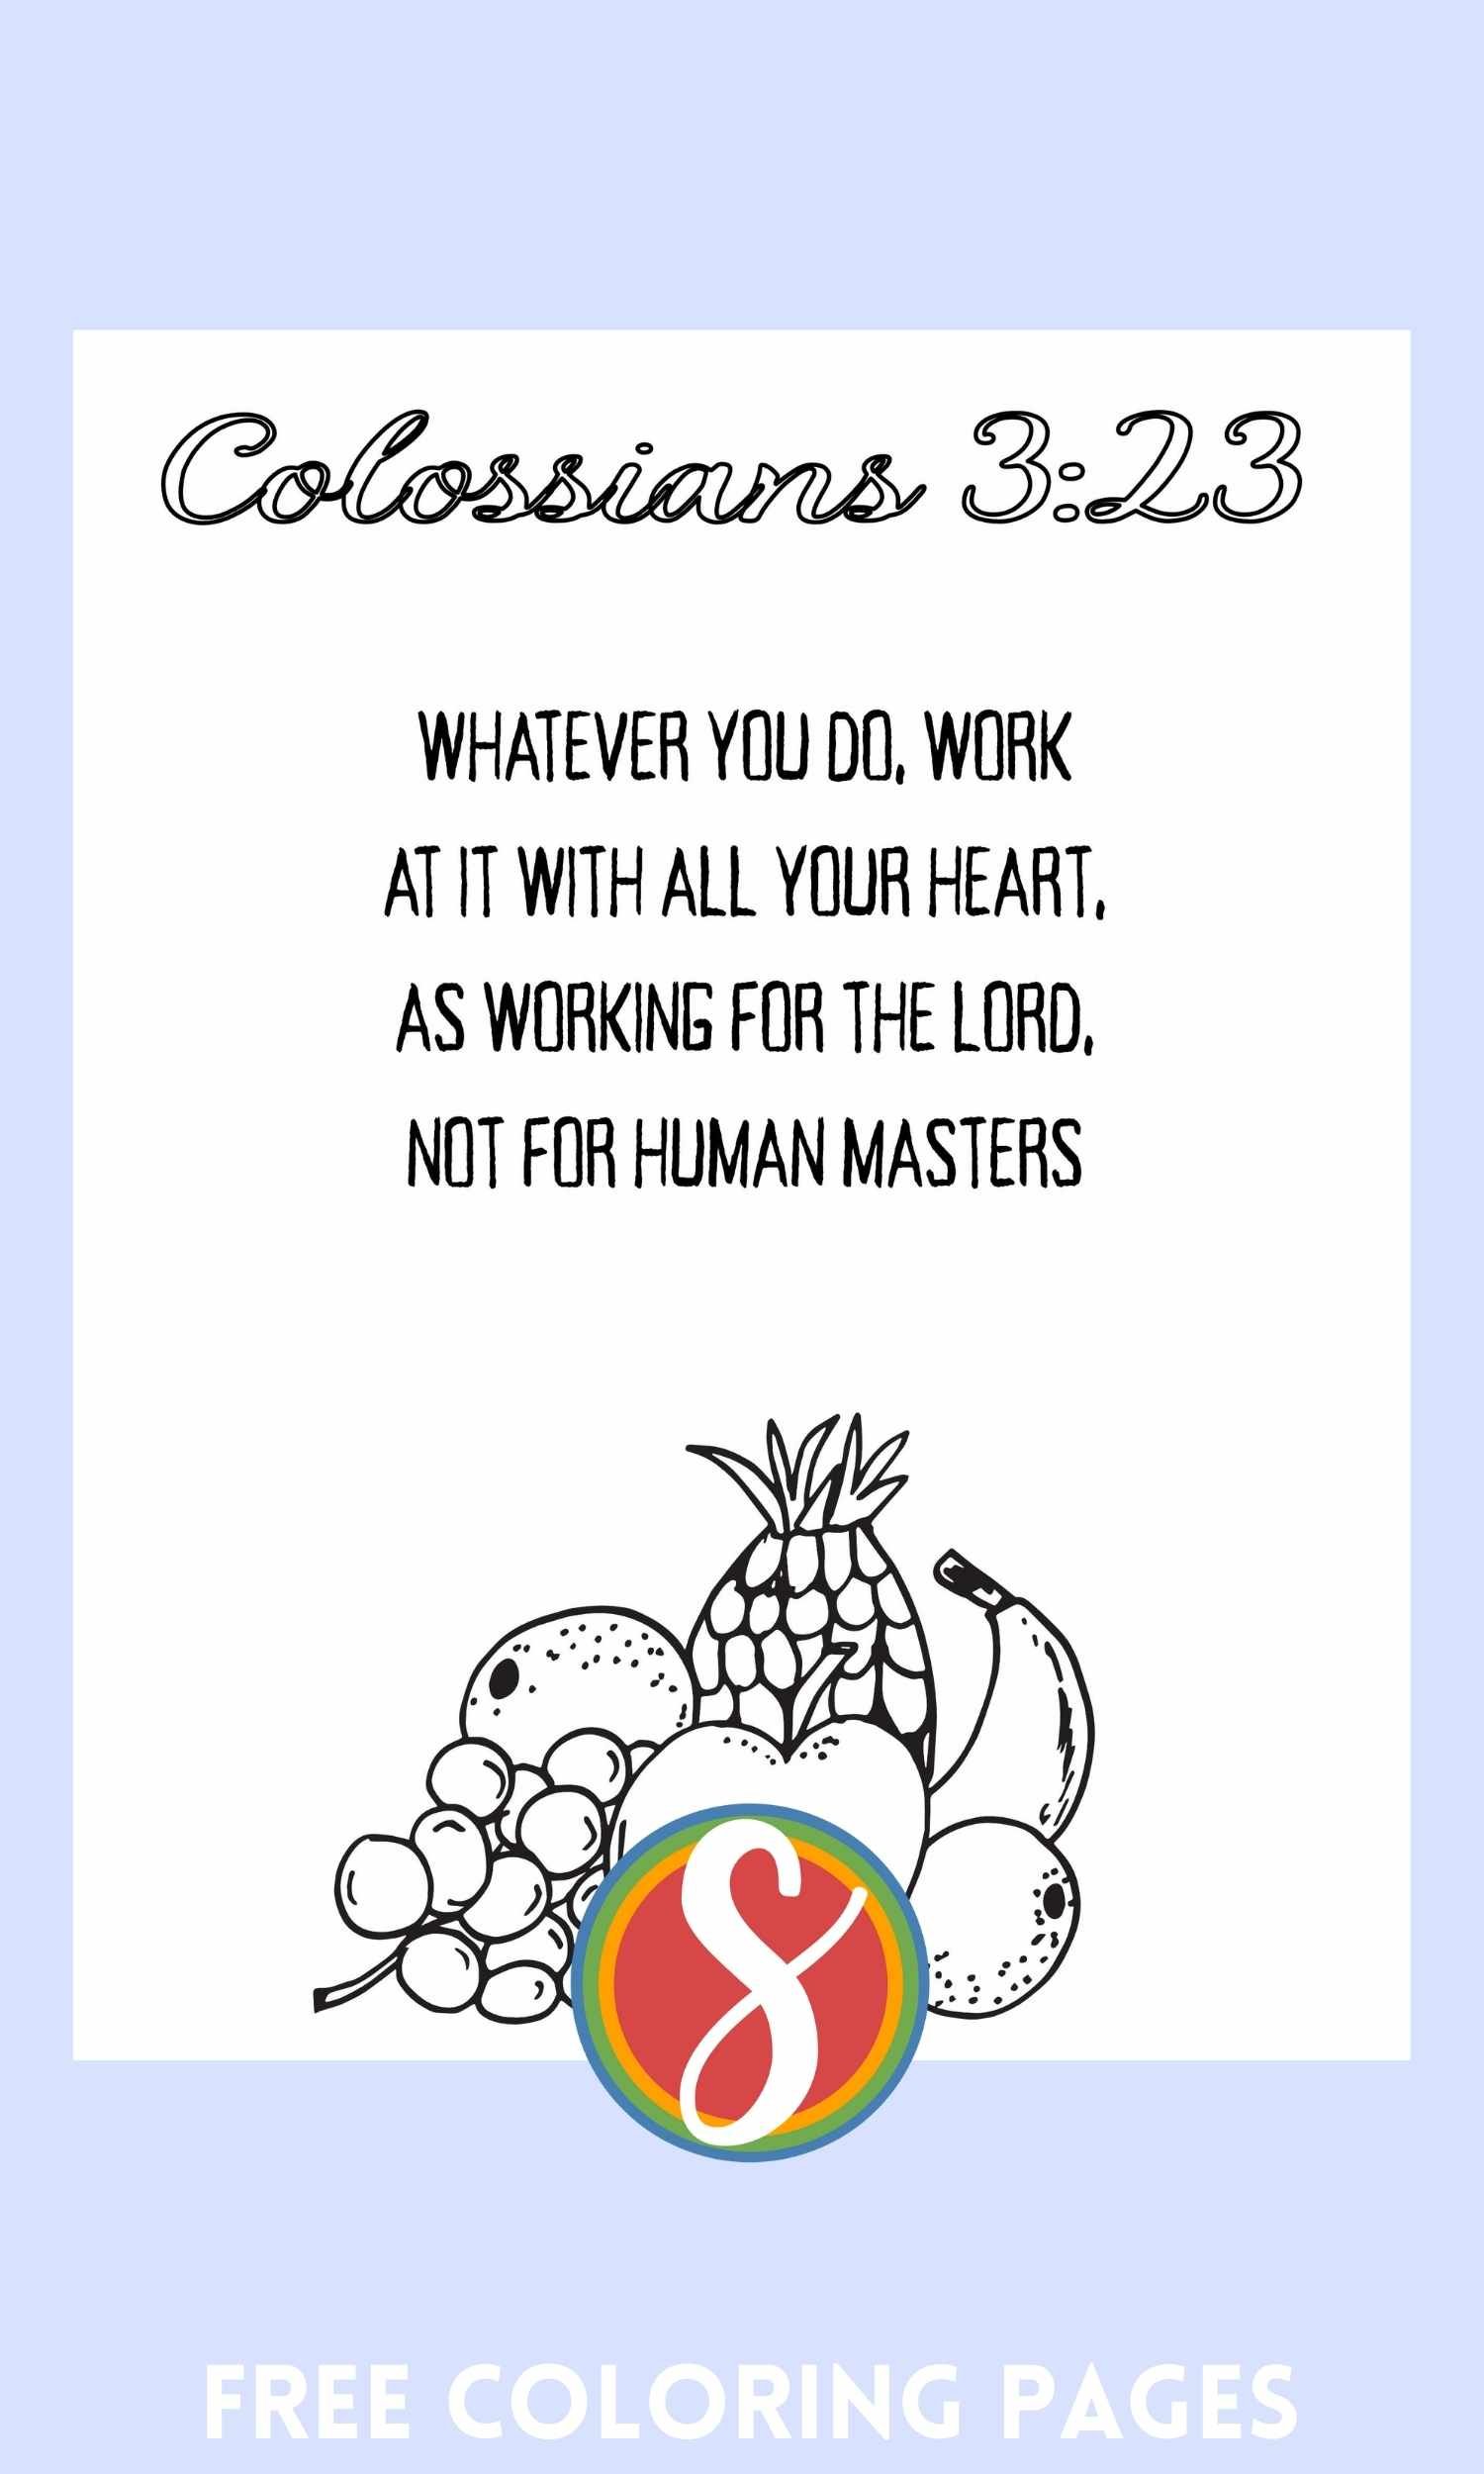 free-colossians-bible-coloring-pages-stevie-doodles